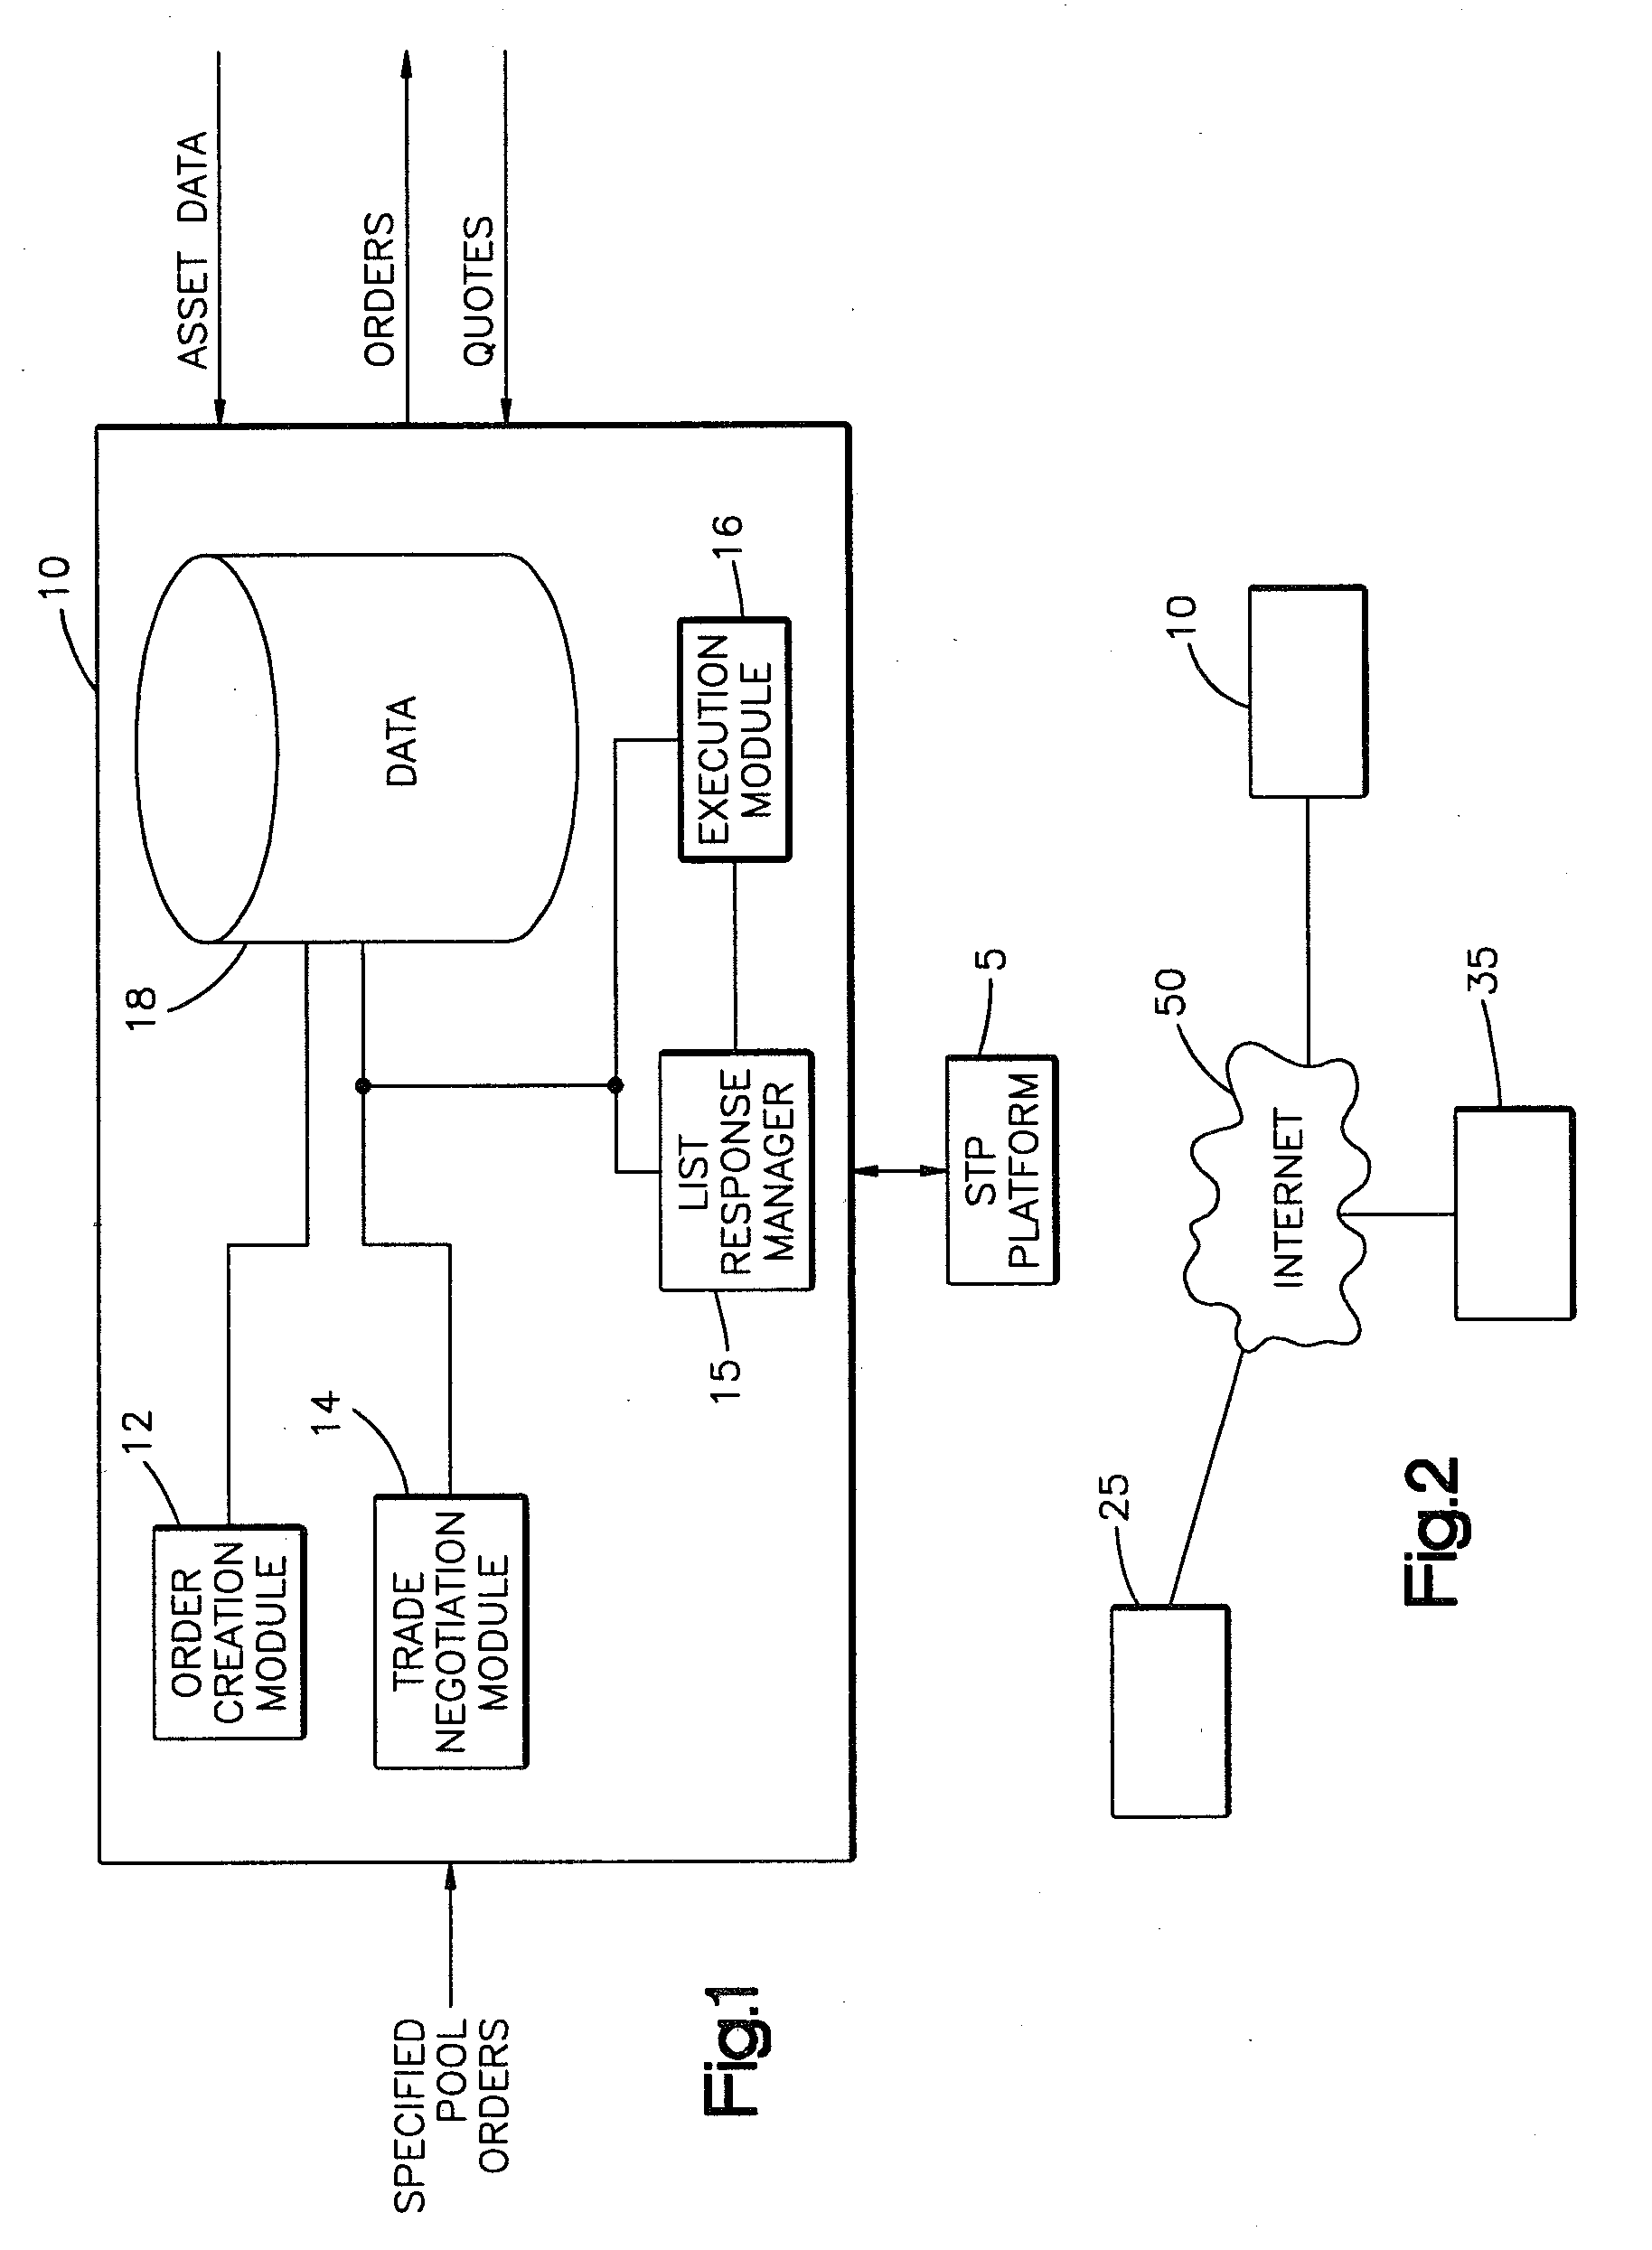 System and method for specified pool trading